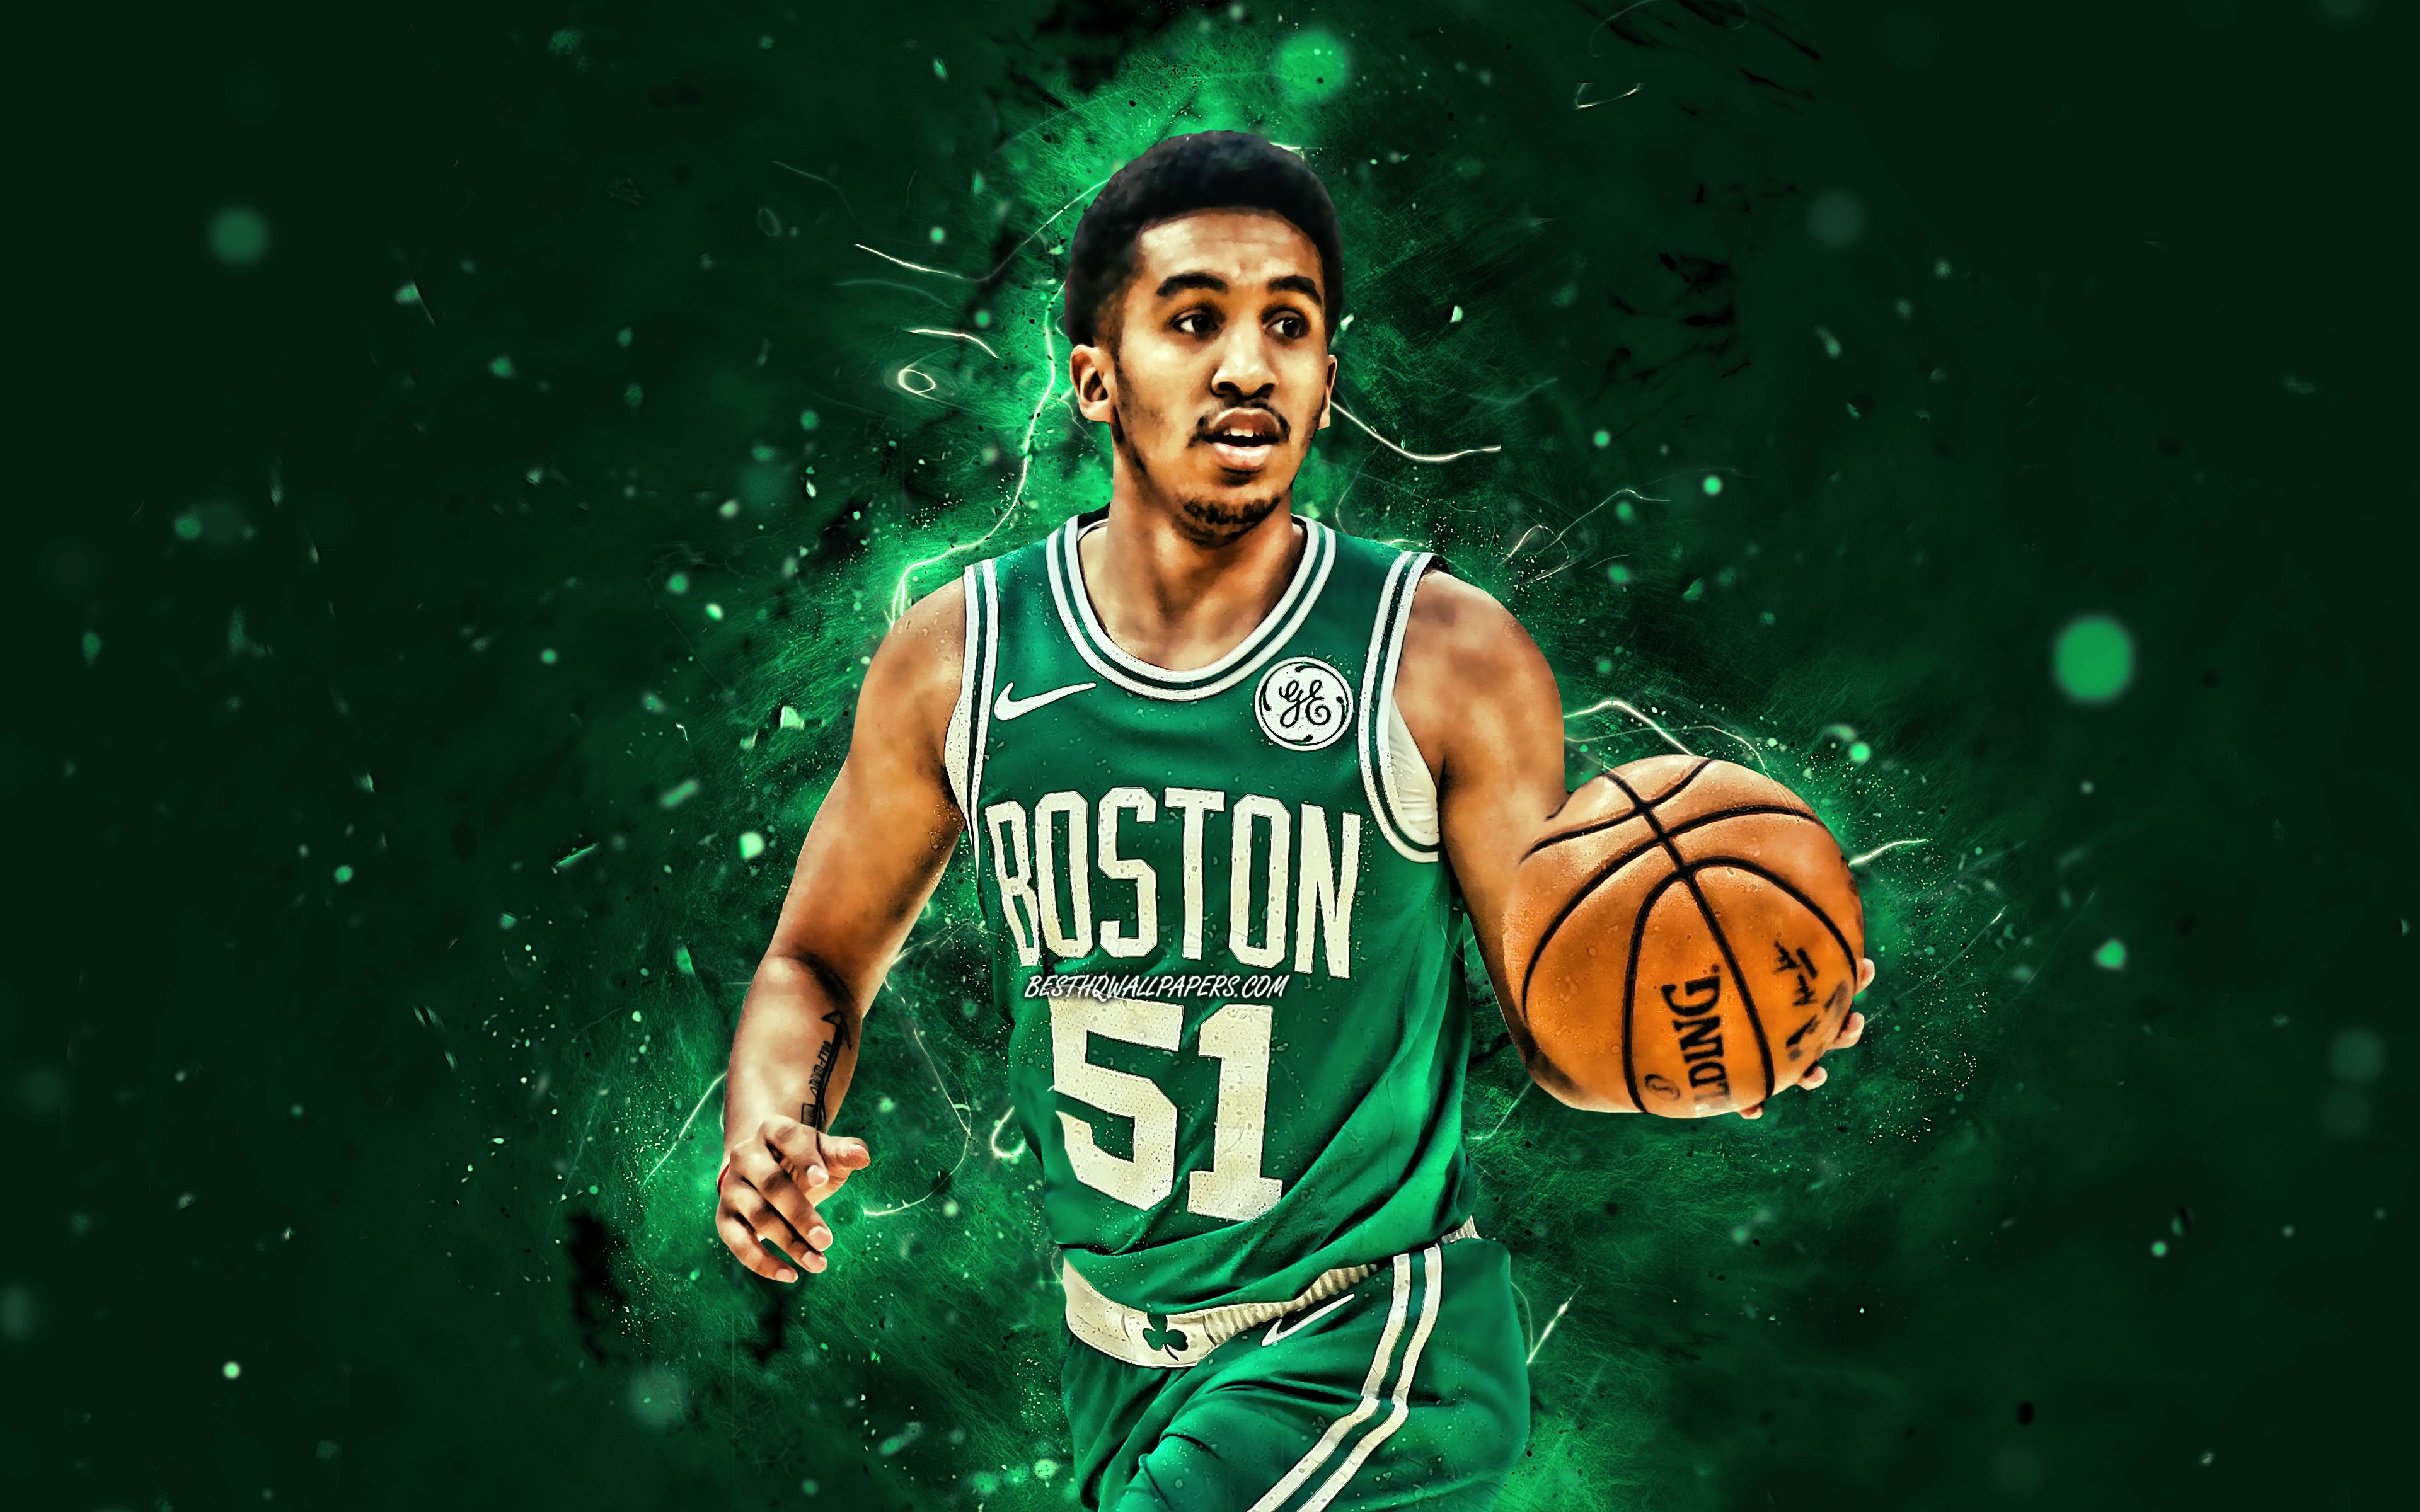 Download wallpaper Tremont Waters, 4k, Boston Celtics, NBA, basketball, green neon lights, USA, Tremont Waters Boston Celtics, creative, Tremont Waters 4K for desktop with resolution 3840x2400. High Quality HD picture wallpaper